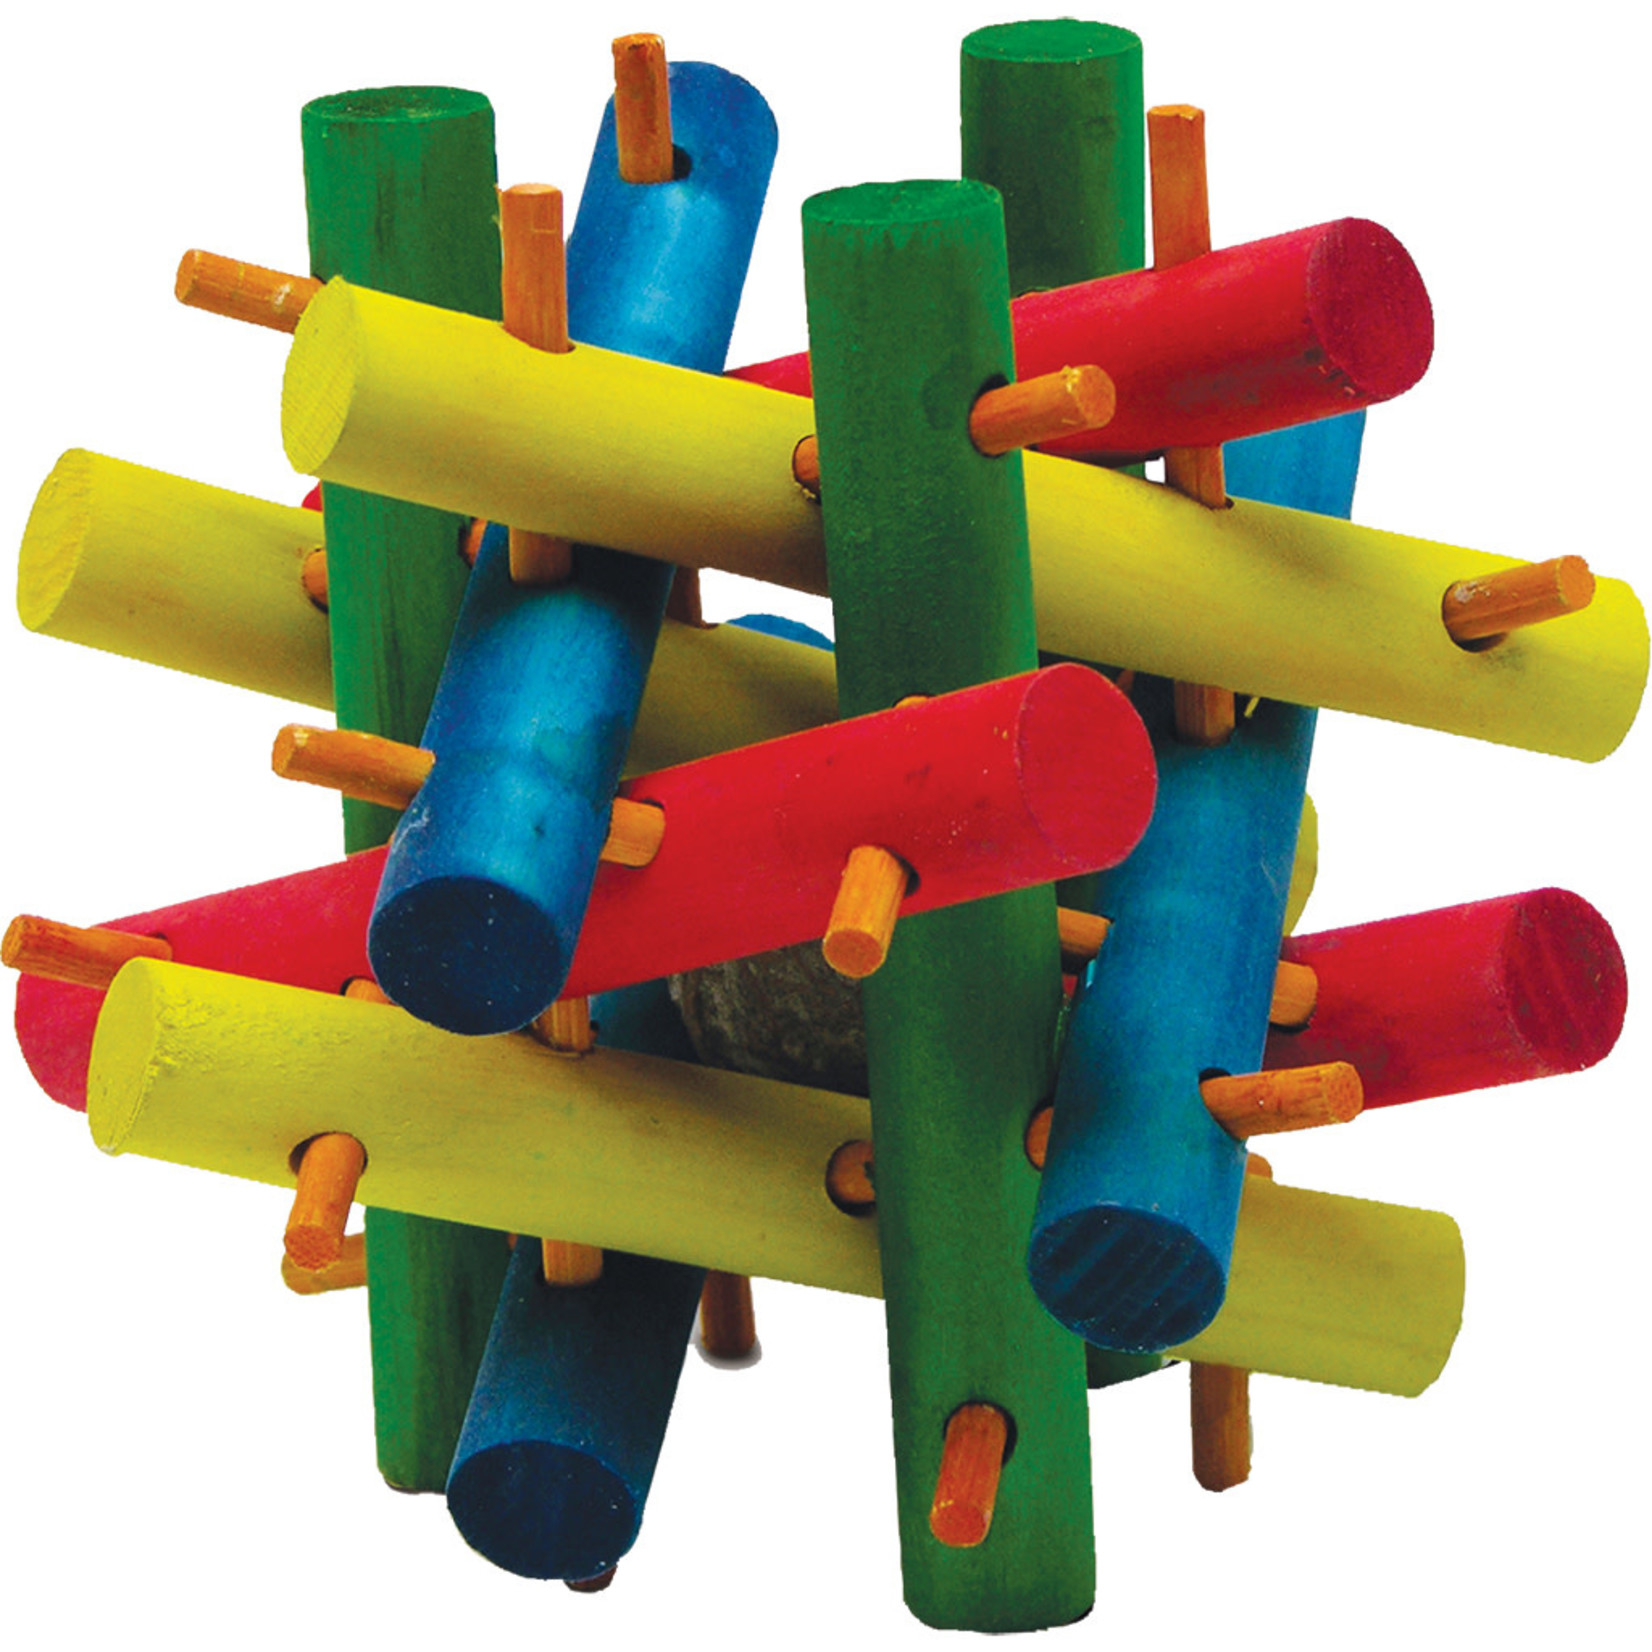 KAYTEE Wooden Toy Colourful for small animal Medium